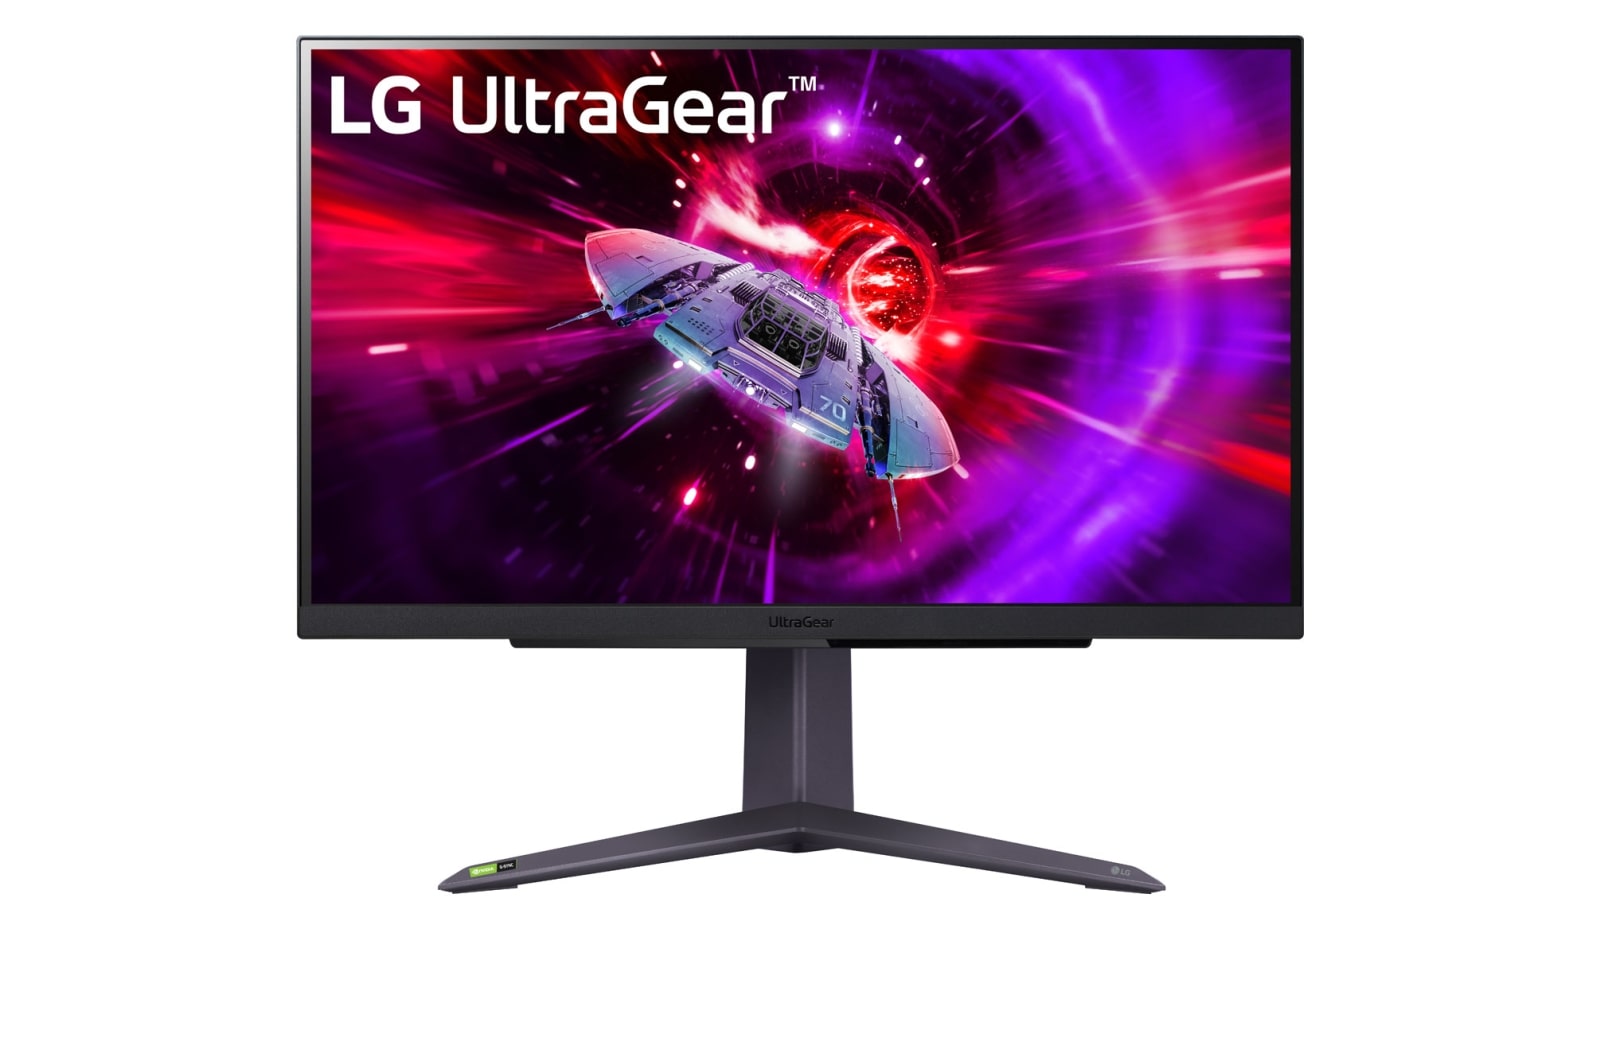 LG Ultragear QHD 165HZ Gaming Monitor right view Front view